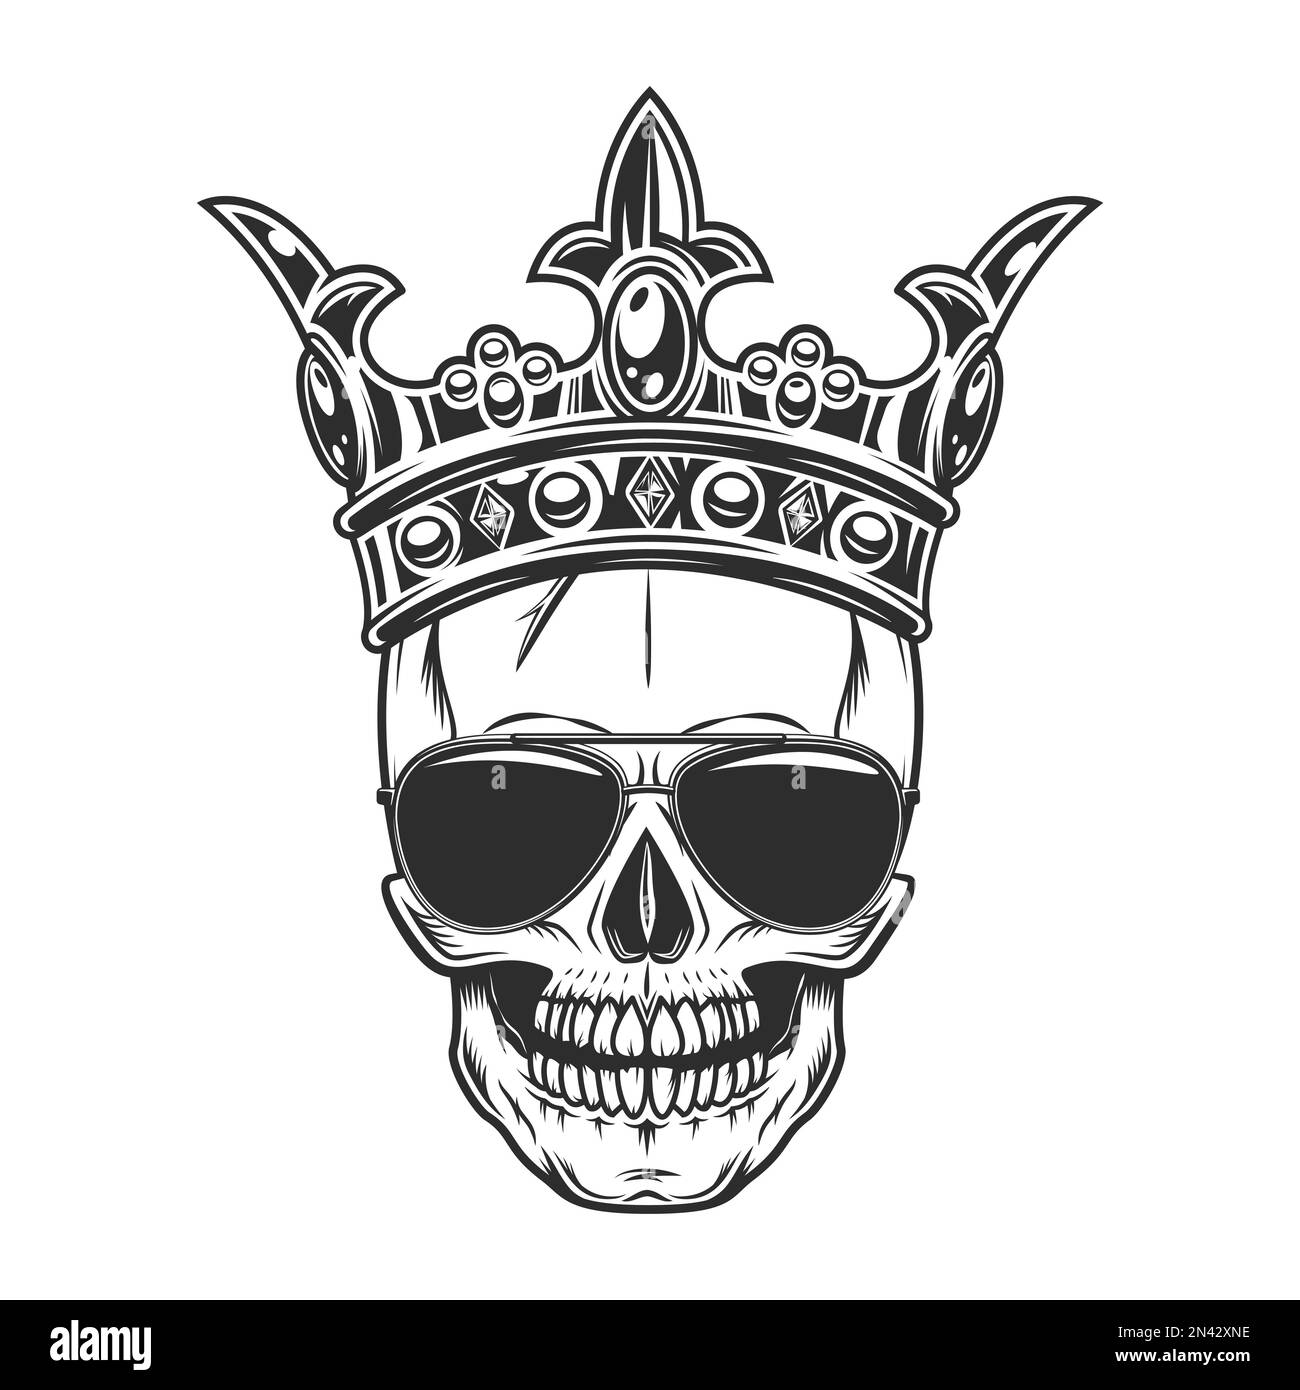 50 Best Crown Tattoo Design Ideas And What They Mean  Saved Tattoo